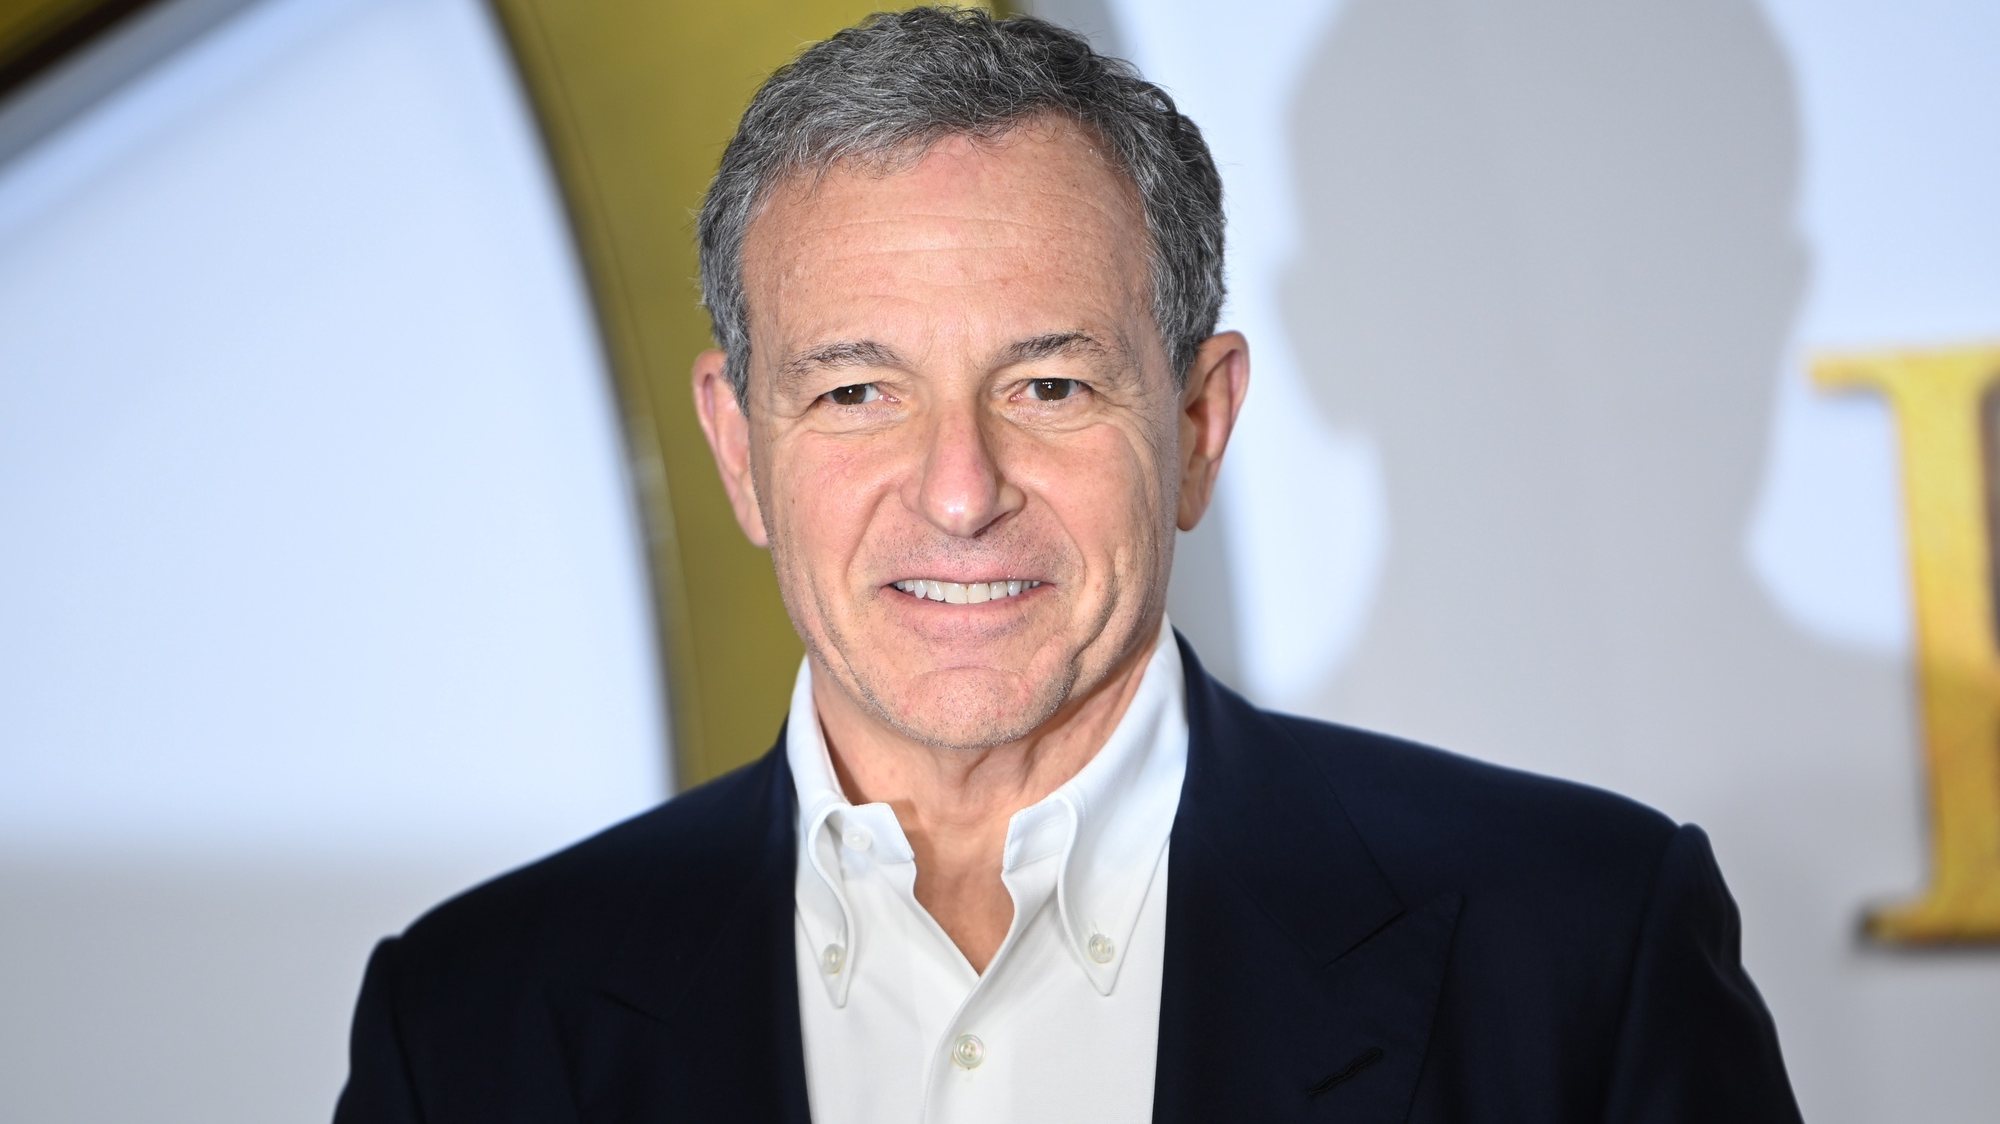 epa09626099 Executive Chairman of the Walt Disney Company, Bob Iger arrives at the world premiere of the film &#039;The King&#039;s Man&#039; in London Britain, 06 December 2021. The film will be released in UK cinemas on 22 December 2021.  EPA/NEIL HALL